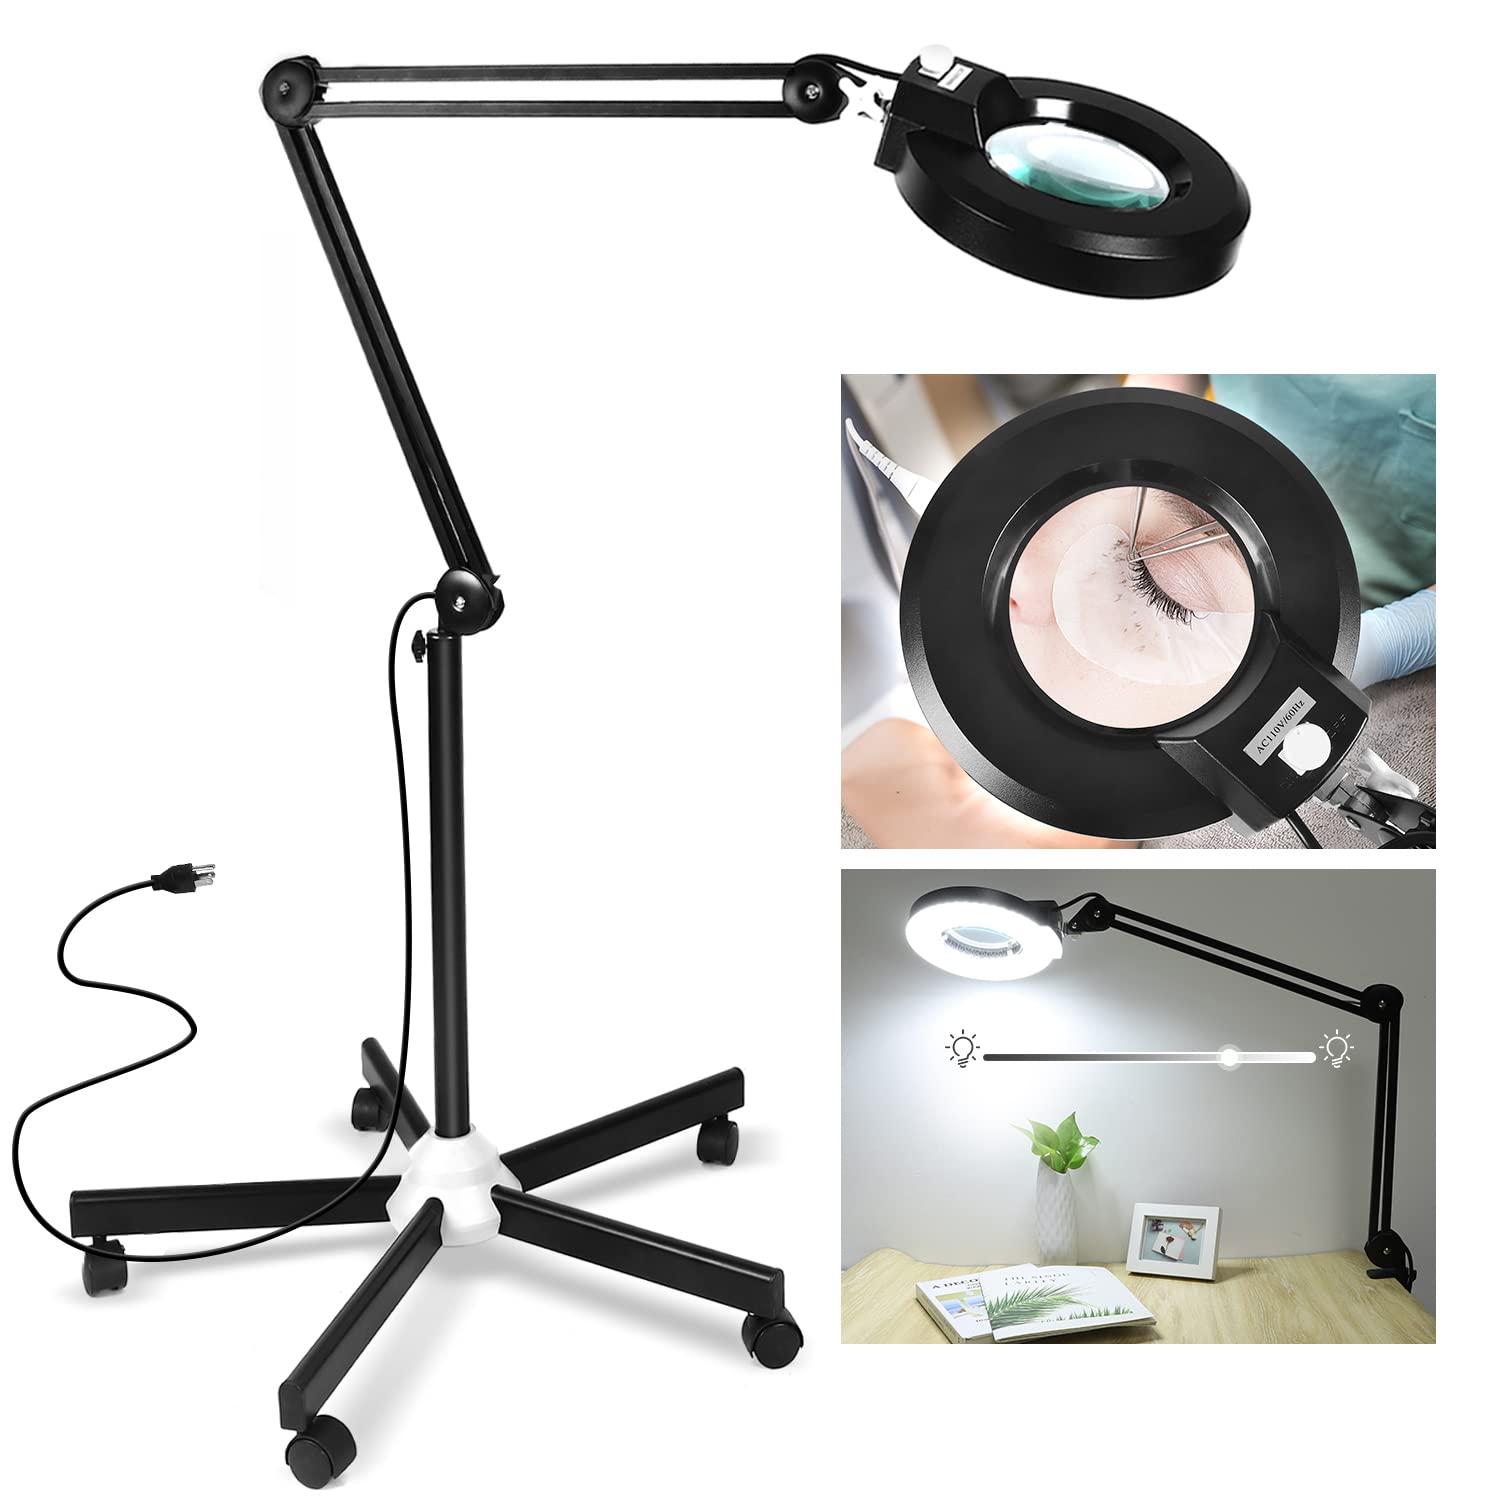 8X Magnifying Glass with Light and Stand, LANCOSC Floor Lamp with 5-Wheel  Rolling Base for Facials Lash Estheticians, 1,500 Lume